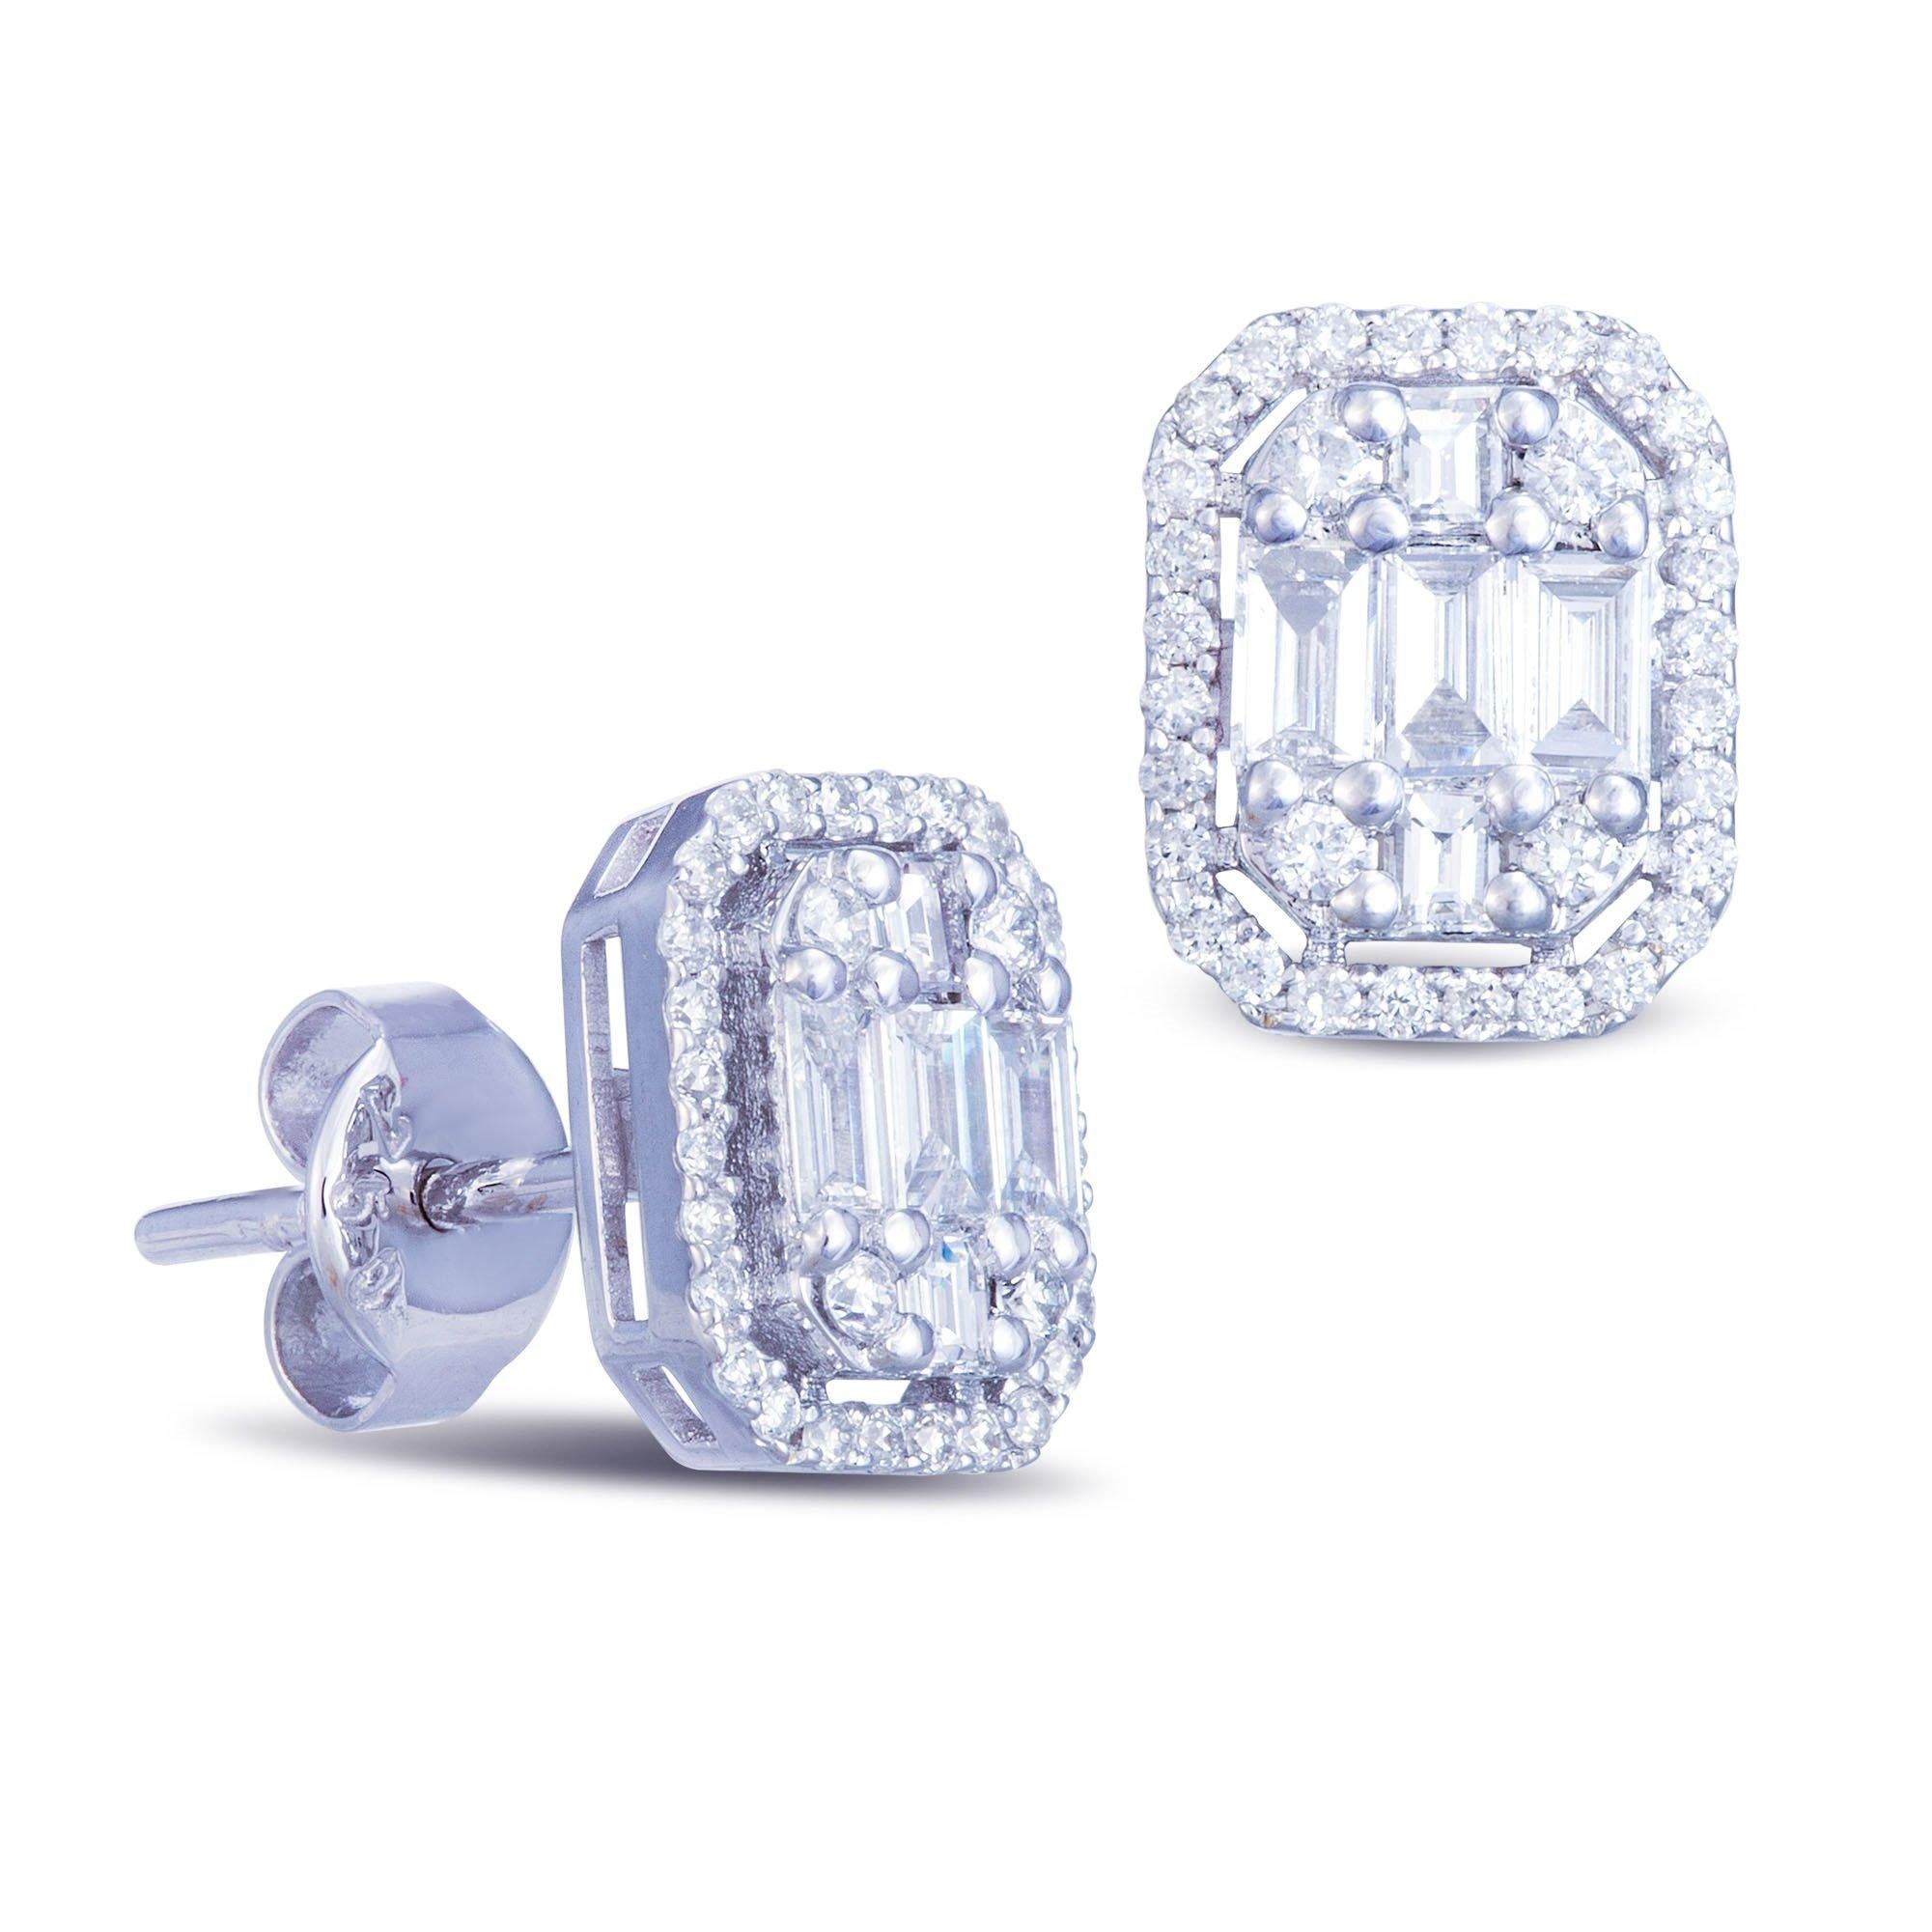 EARRING 18K 

White Diamonds 0.27 Cts/68 Pcs DPR 0.09 Cts/4 Pcs Baguette Diamond 0.32 Cts/6

With a heritage of ancient fine Swiss jewelry traditions, NATKINA is a Geneva based jewellery brand, which creates modern jewellery masterpieces suitable